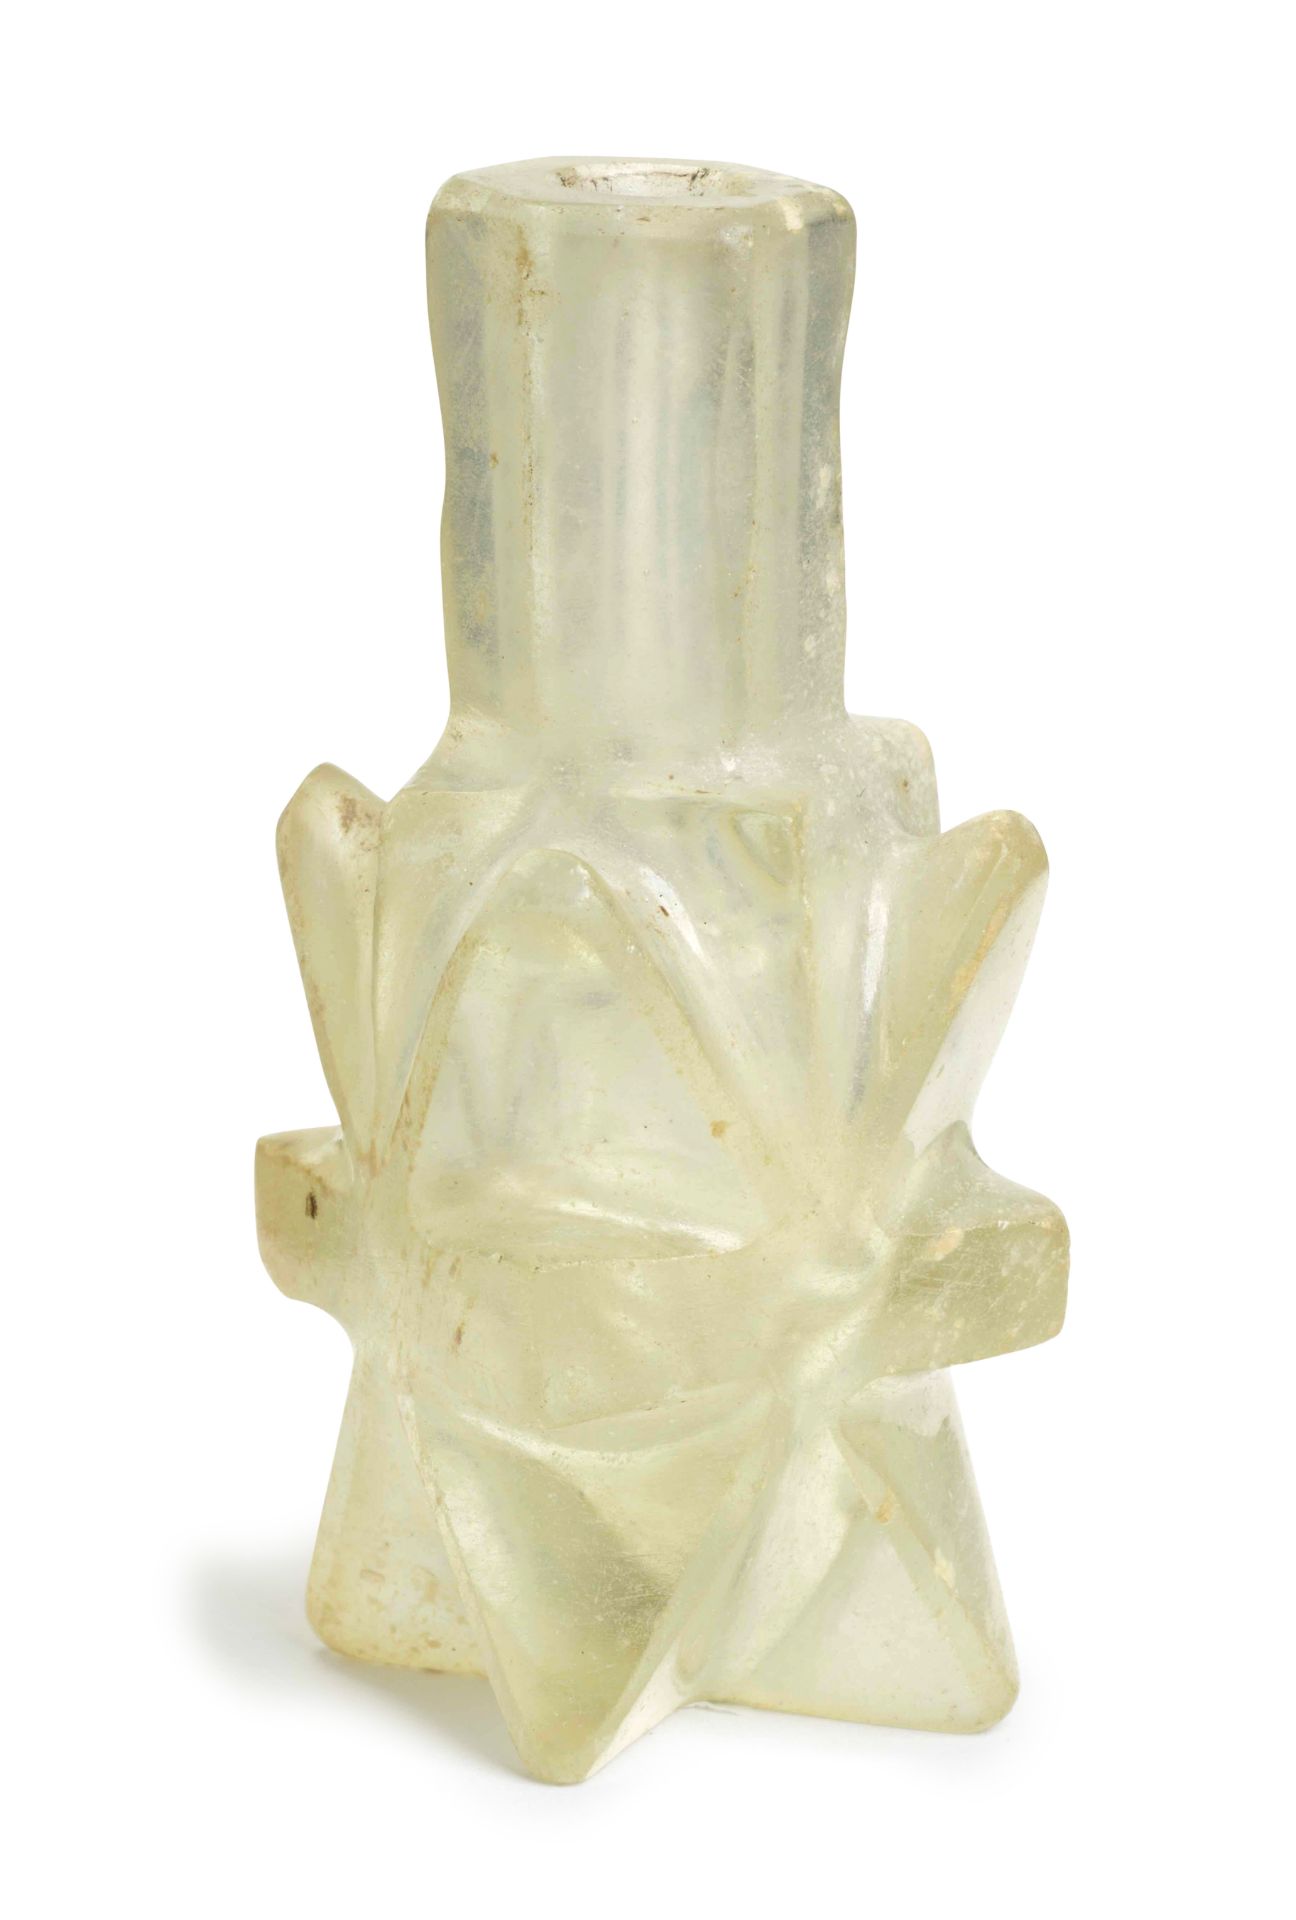 A Fatimid glass molar flask probably Egypt, 9th-10th Century